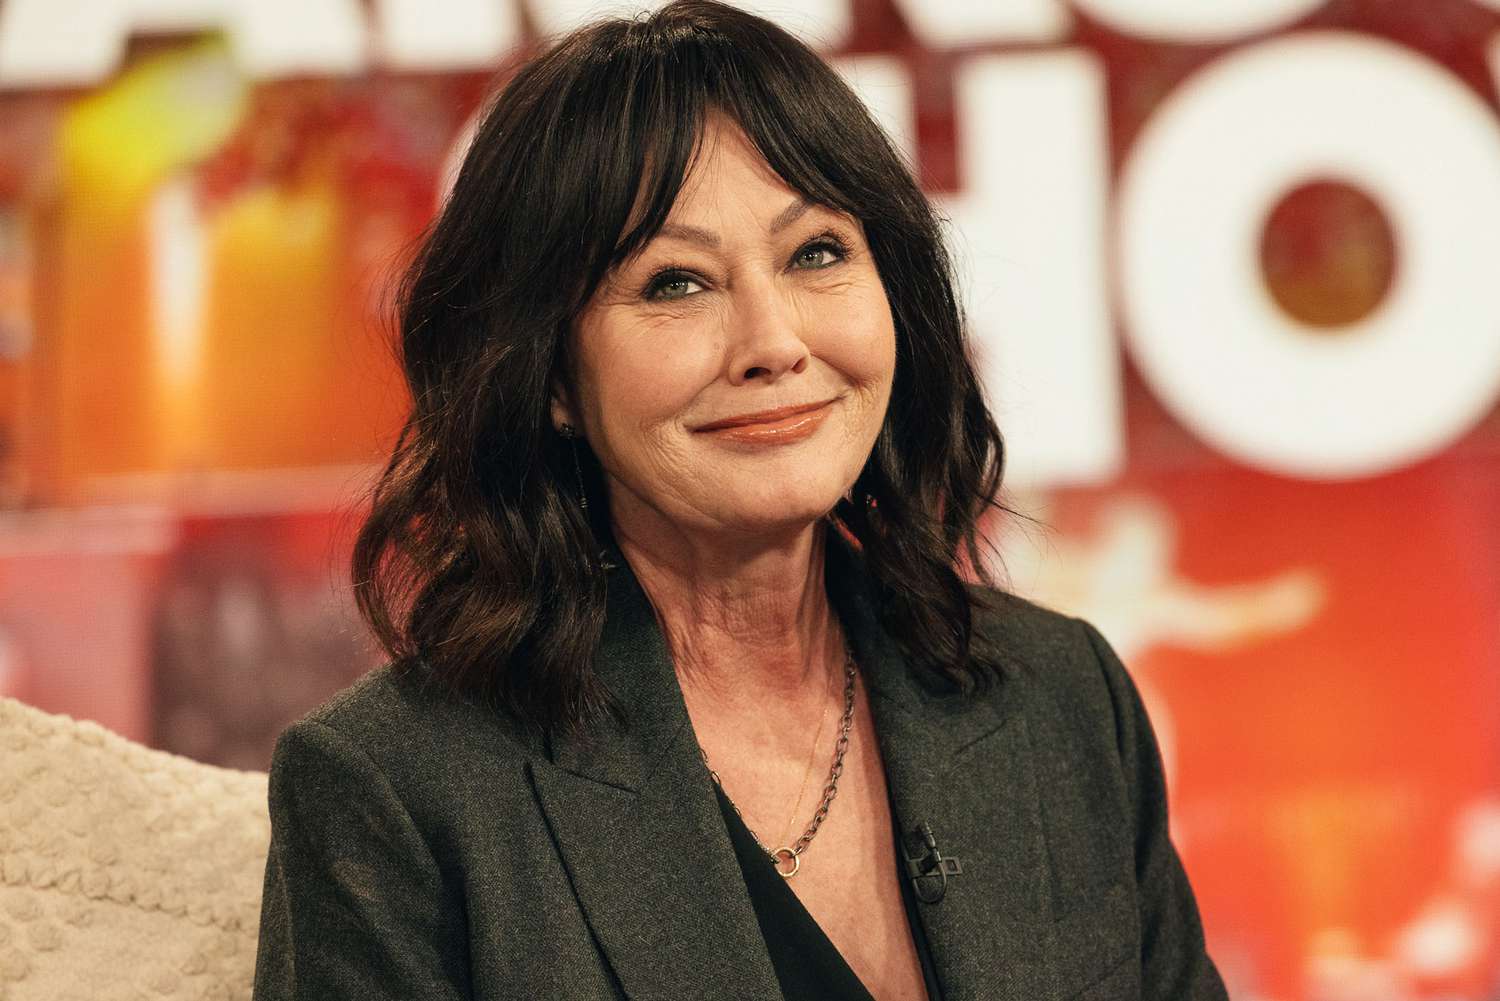 Shannen Doherty Says It’s ‘Hard’ Dating with Cancer: ‘I’m a Very Hard Sell’ [Video]